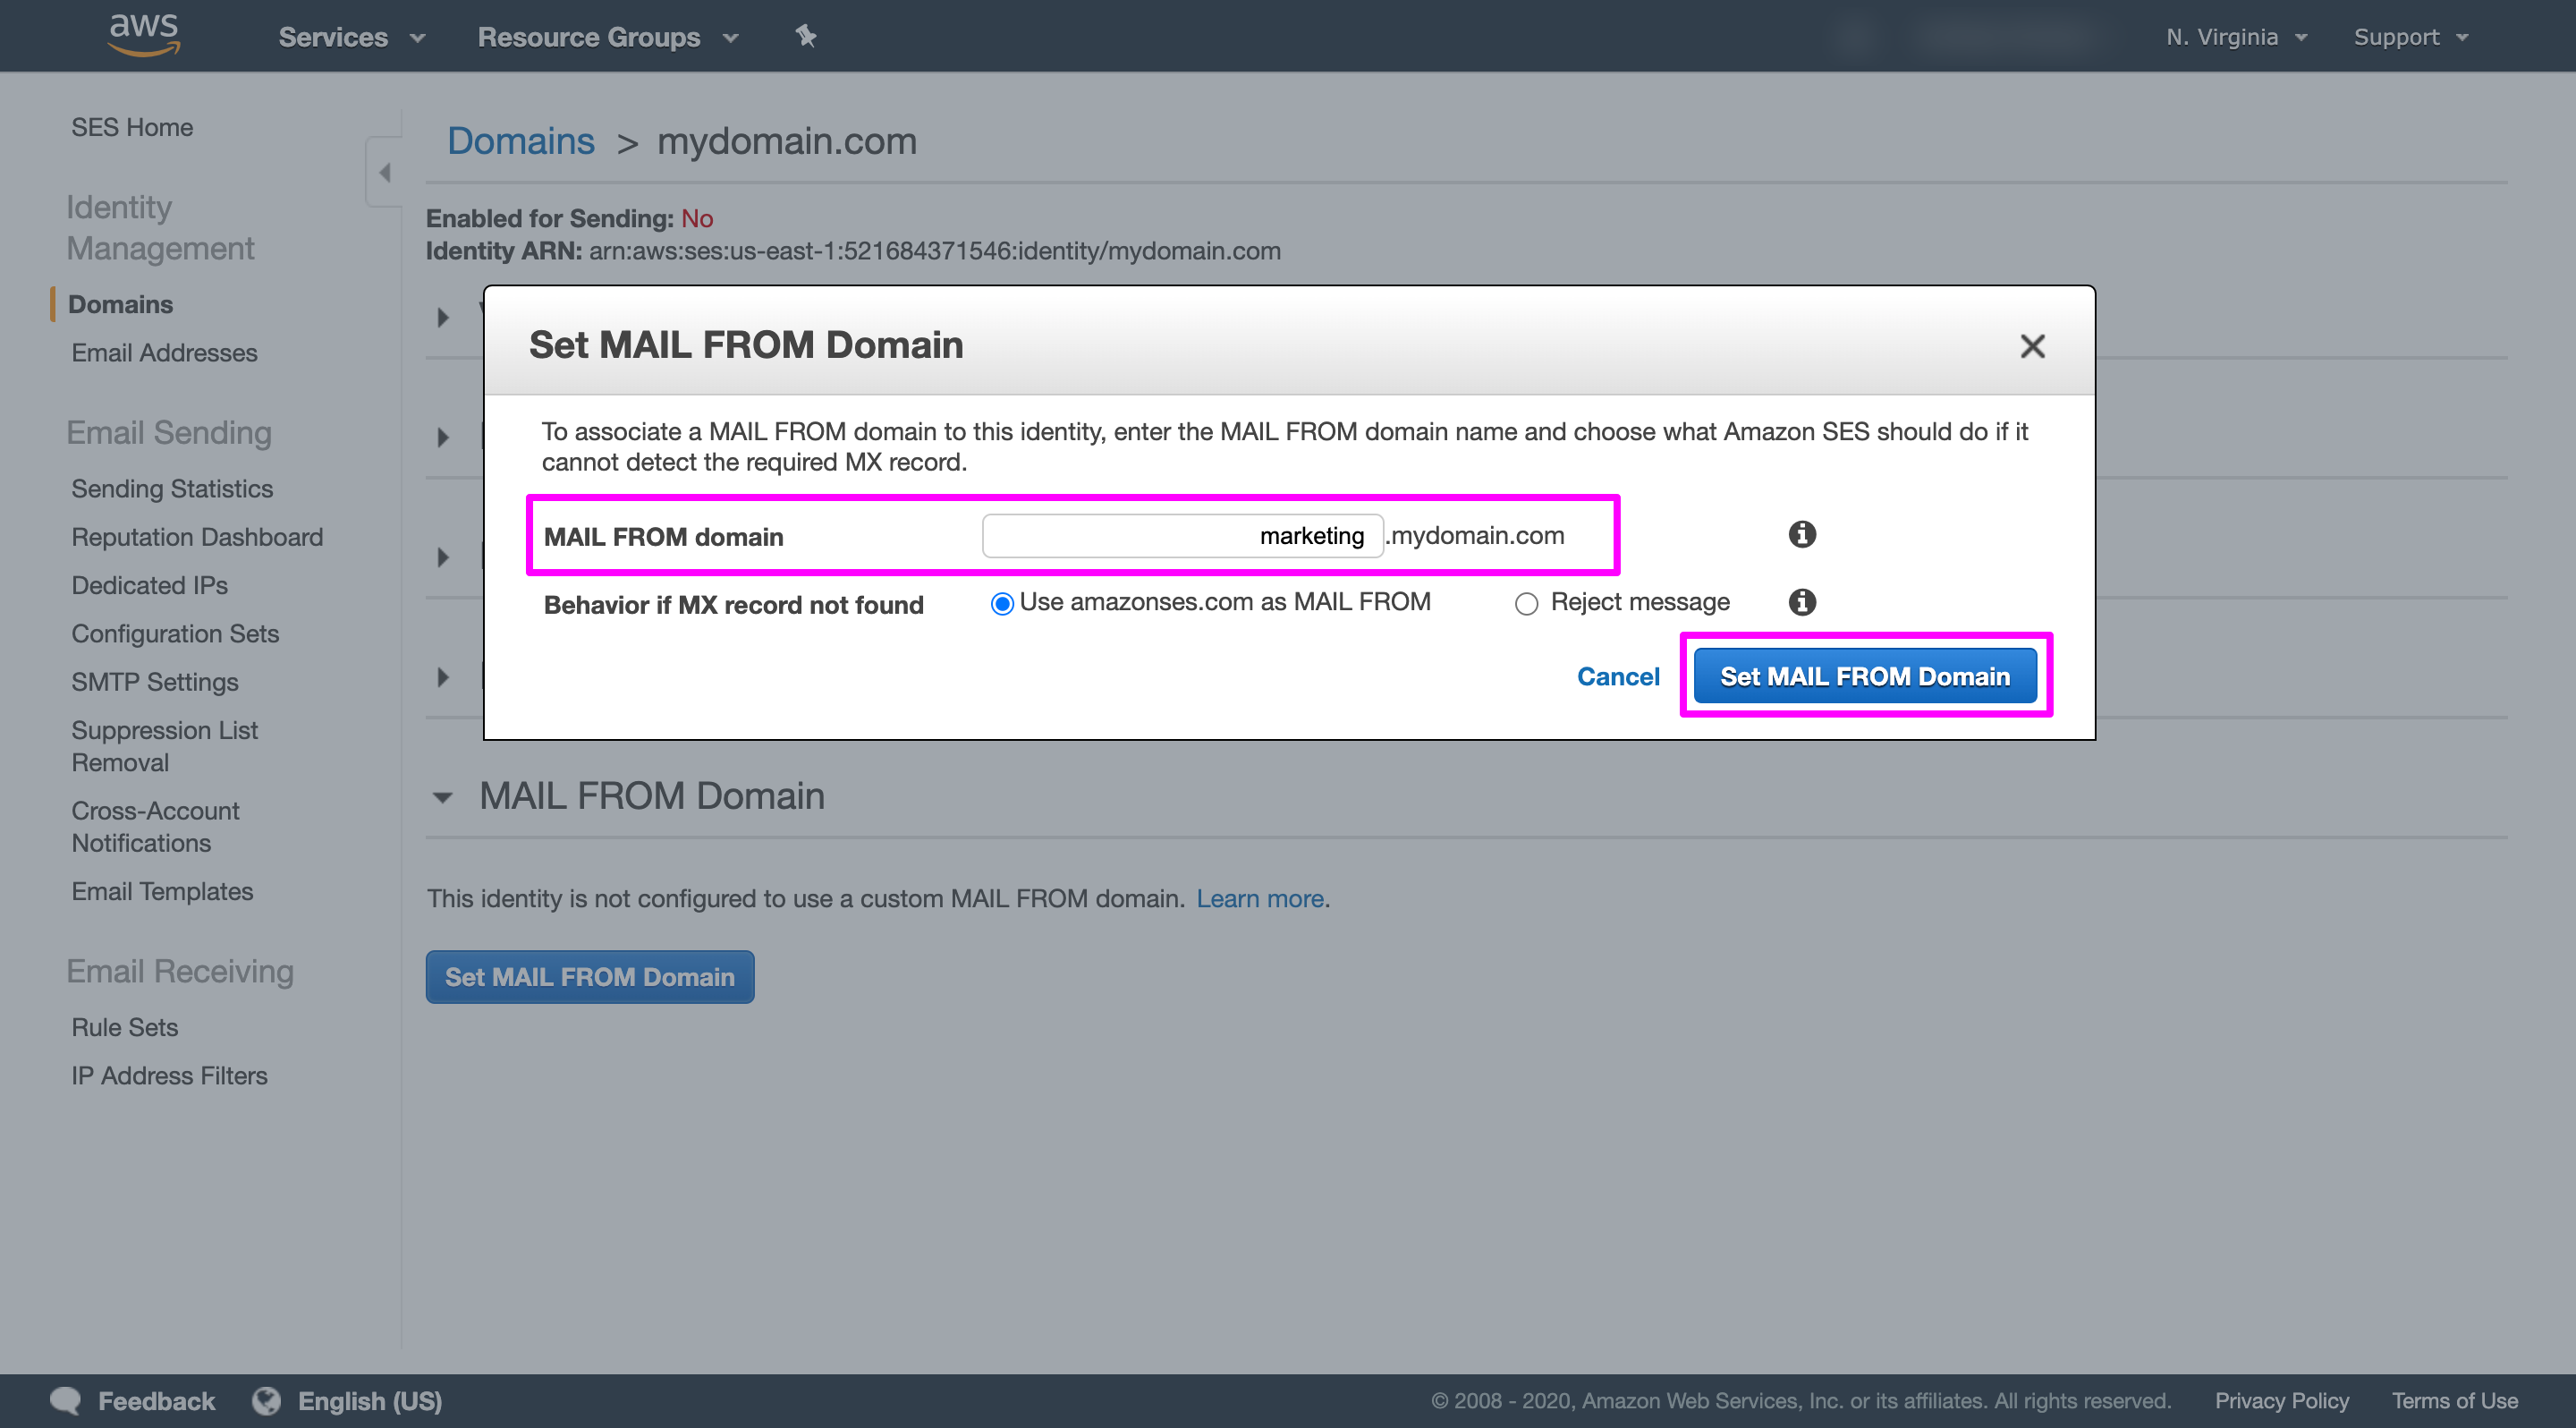 Under MAIL FROM Domain in Amazon SES console, clicking the Set MAIL FROM Domain button.